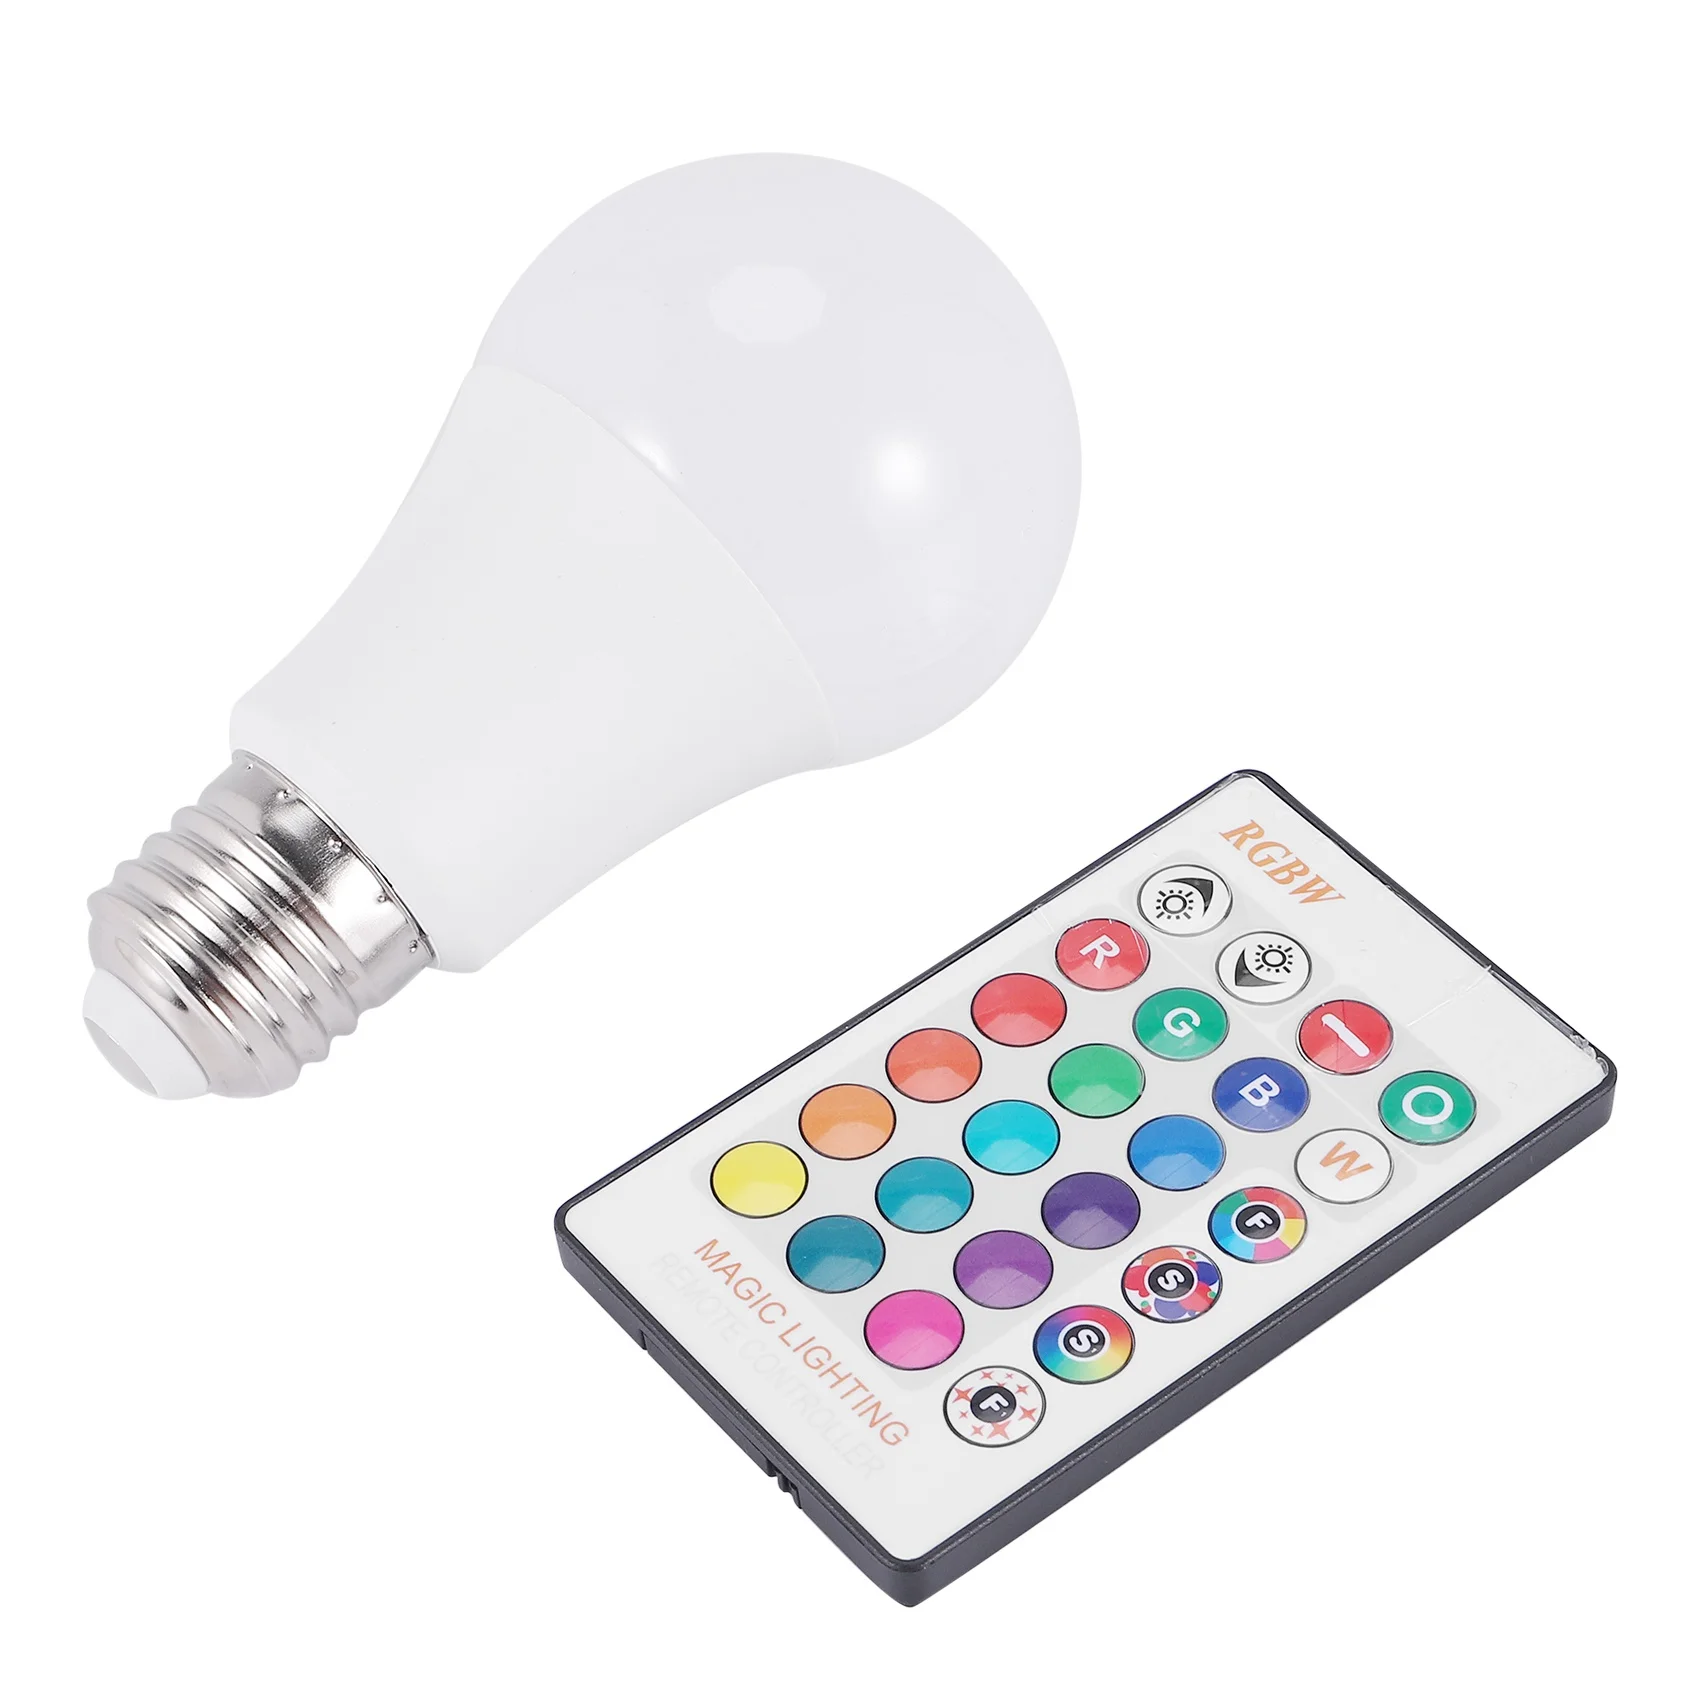 

E27 Smart Control Lamp Led RGB Light Dimmable 7W RGBW Led Lamp Colorful Changing Bulb Led Lampada RGBW White Decor Home